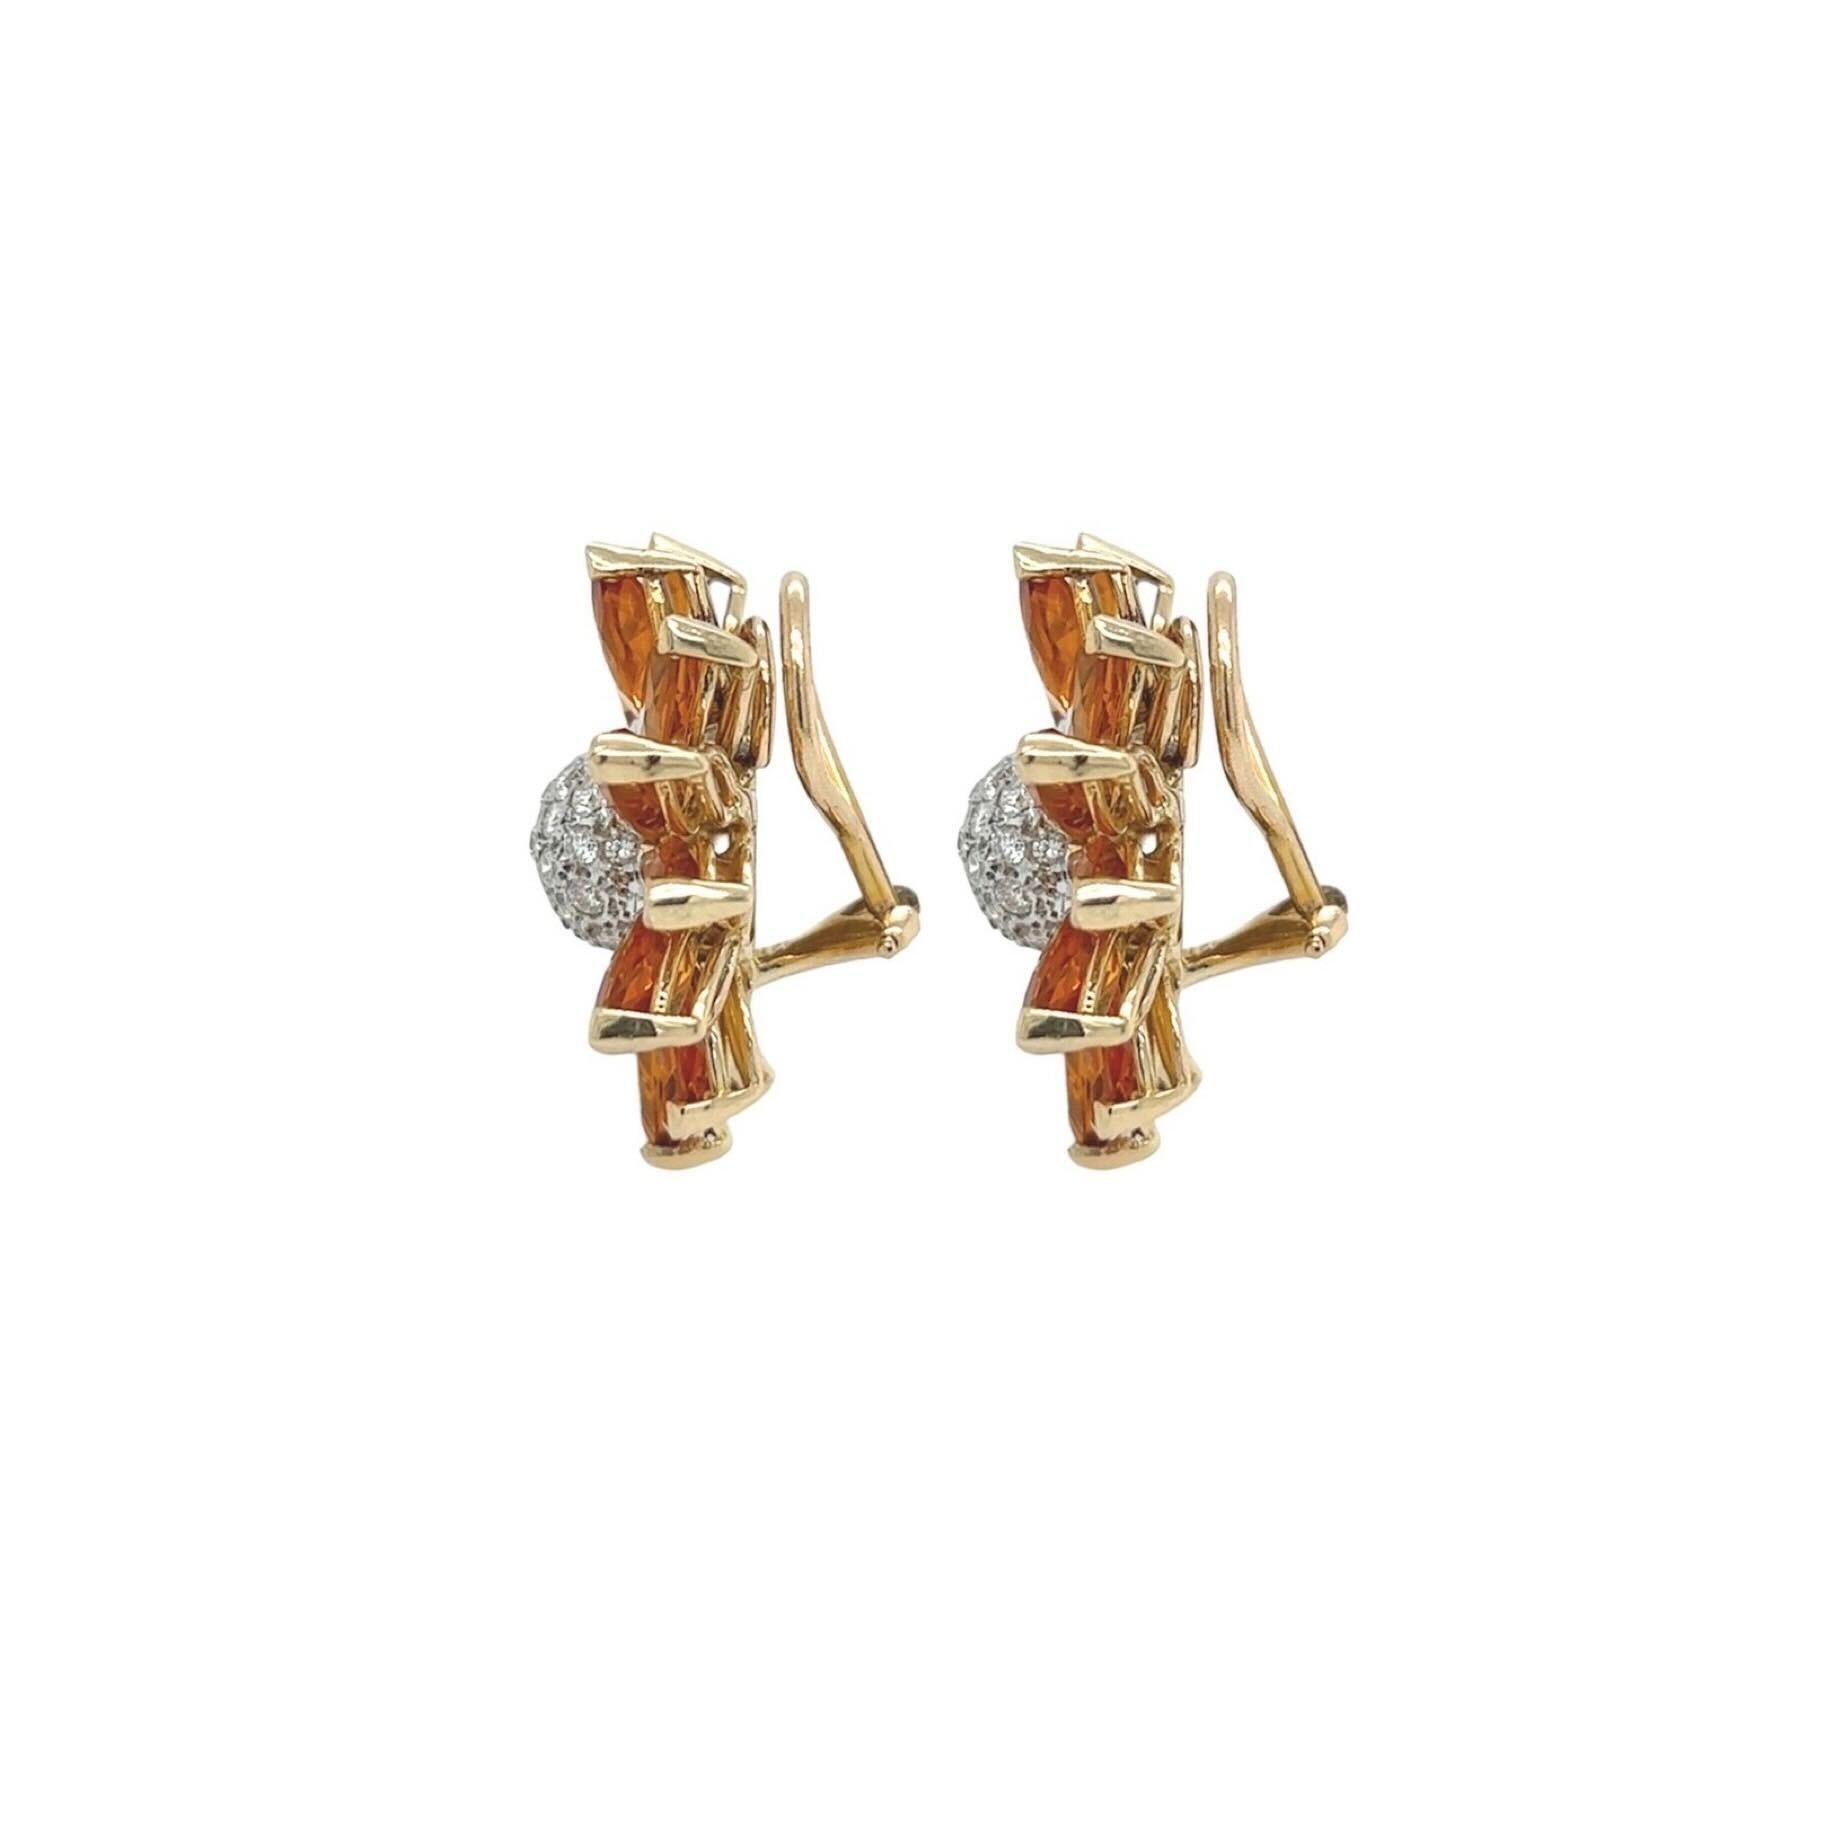 Marquise Cut A Pair of Yellow gold, White Gold, Citrine and Diamond Earrings